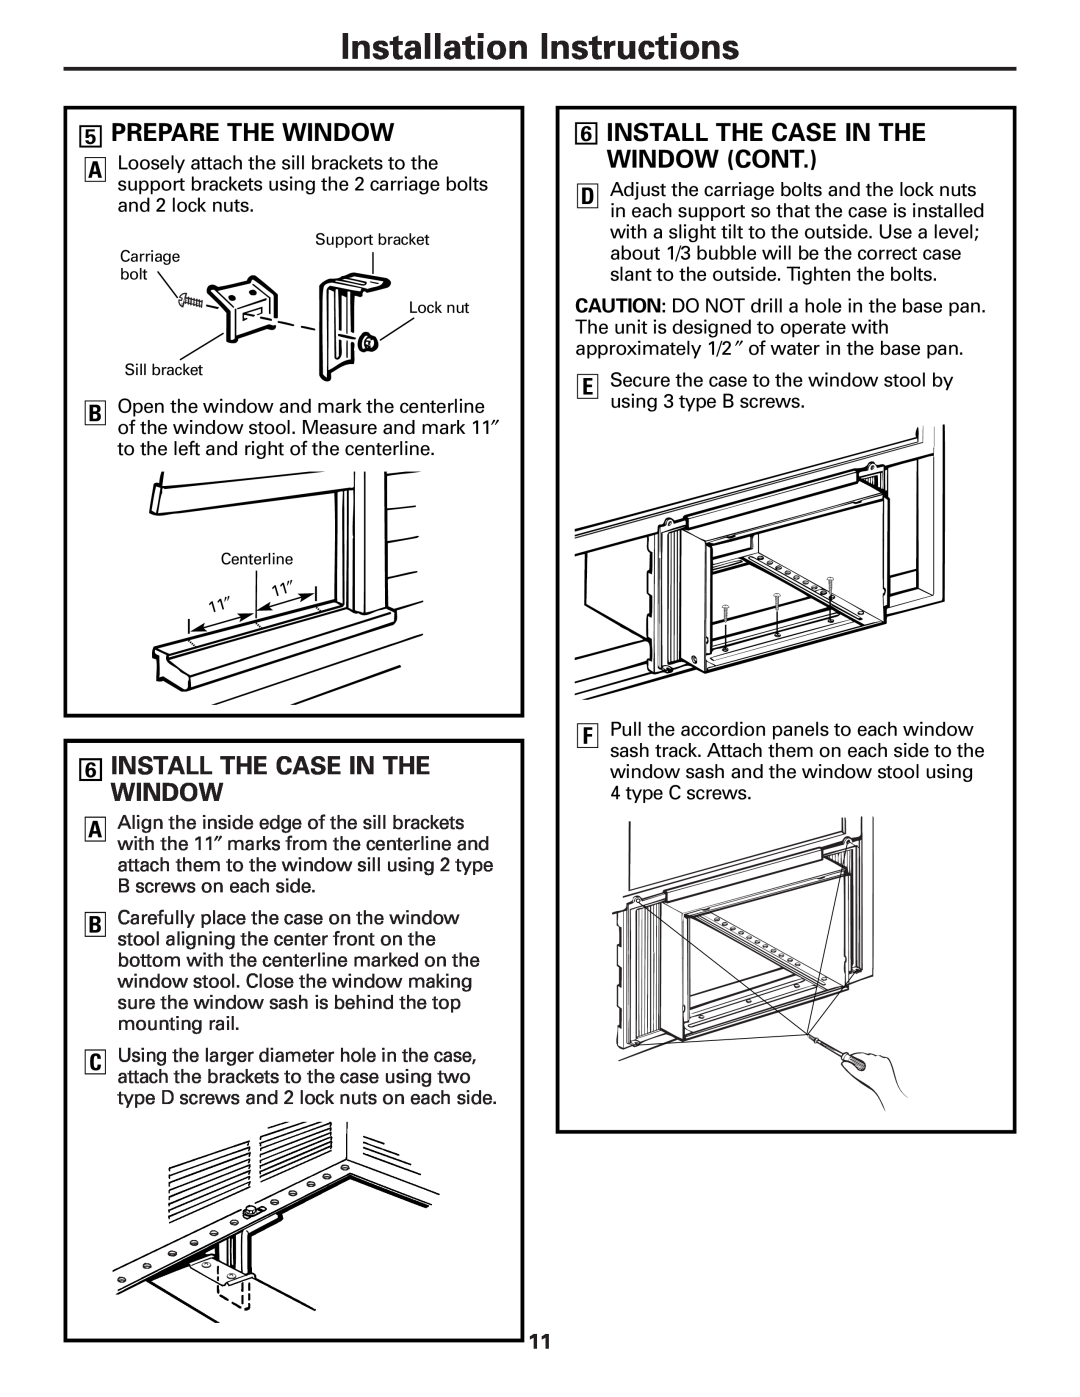 GE AGH18, AGW18 owner manual 5PREPARE THE WINDOW, 6INSTALL THE CASE IN THE WINDOW CONT, Installation Instructions 